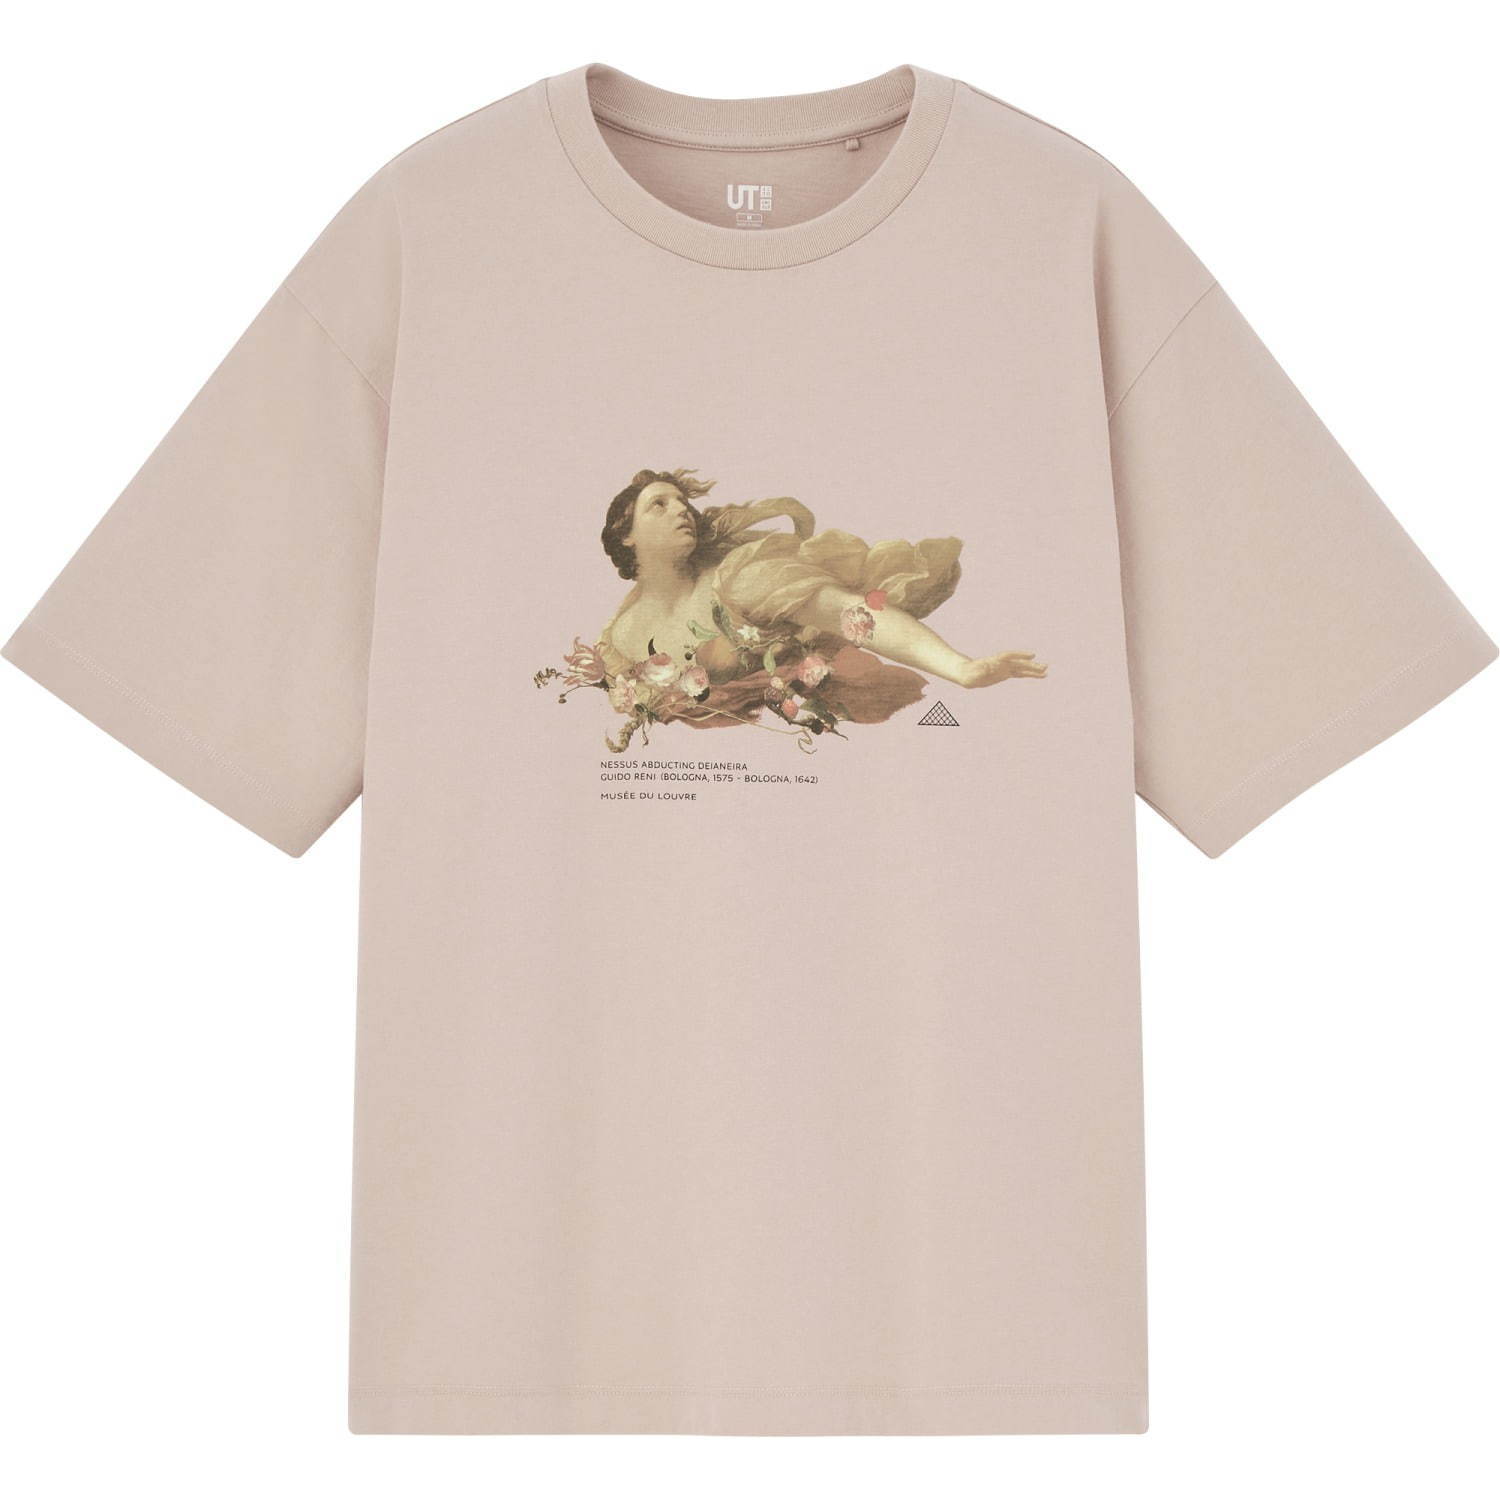 WOMEN Tシャツ 1,500円＋税
Deianeira and the Centaur Nessus / Guido RENI
© RMN-Grand Palais (Musée du Louvre) / Gérard Blot
Flowers in a Crystal Vase Standing on a Stone Pedestal, with a Dragonfly / Abraham MIGNON
© RMN-Grand Palais (Musée du Louvre) / Stéphane Maréchalle
Louvre Pyramid © I.M. Pei